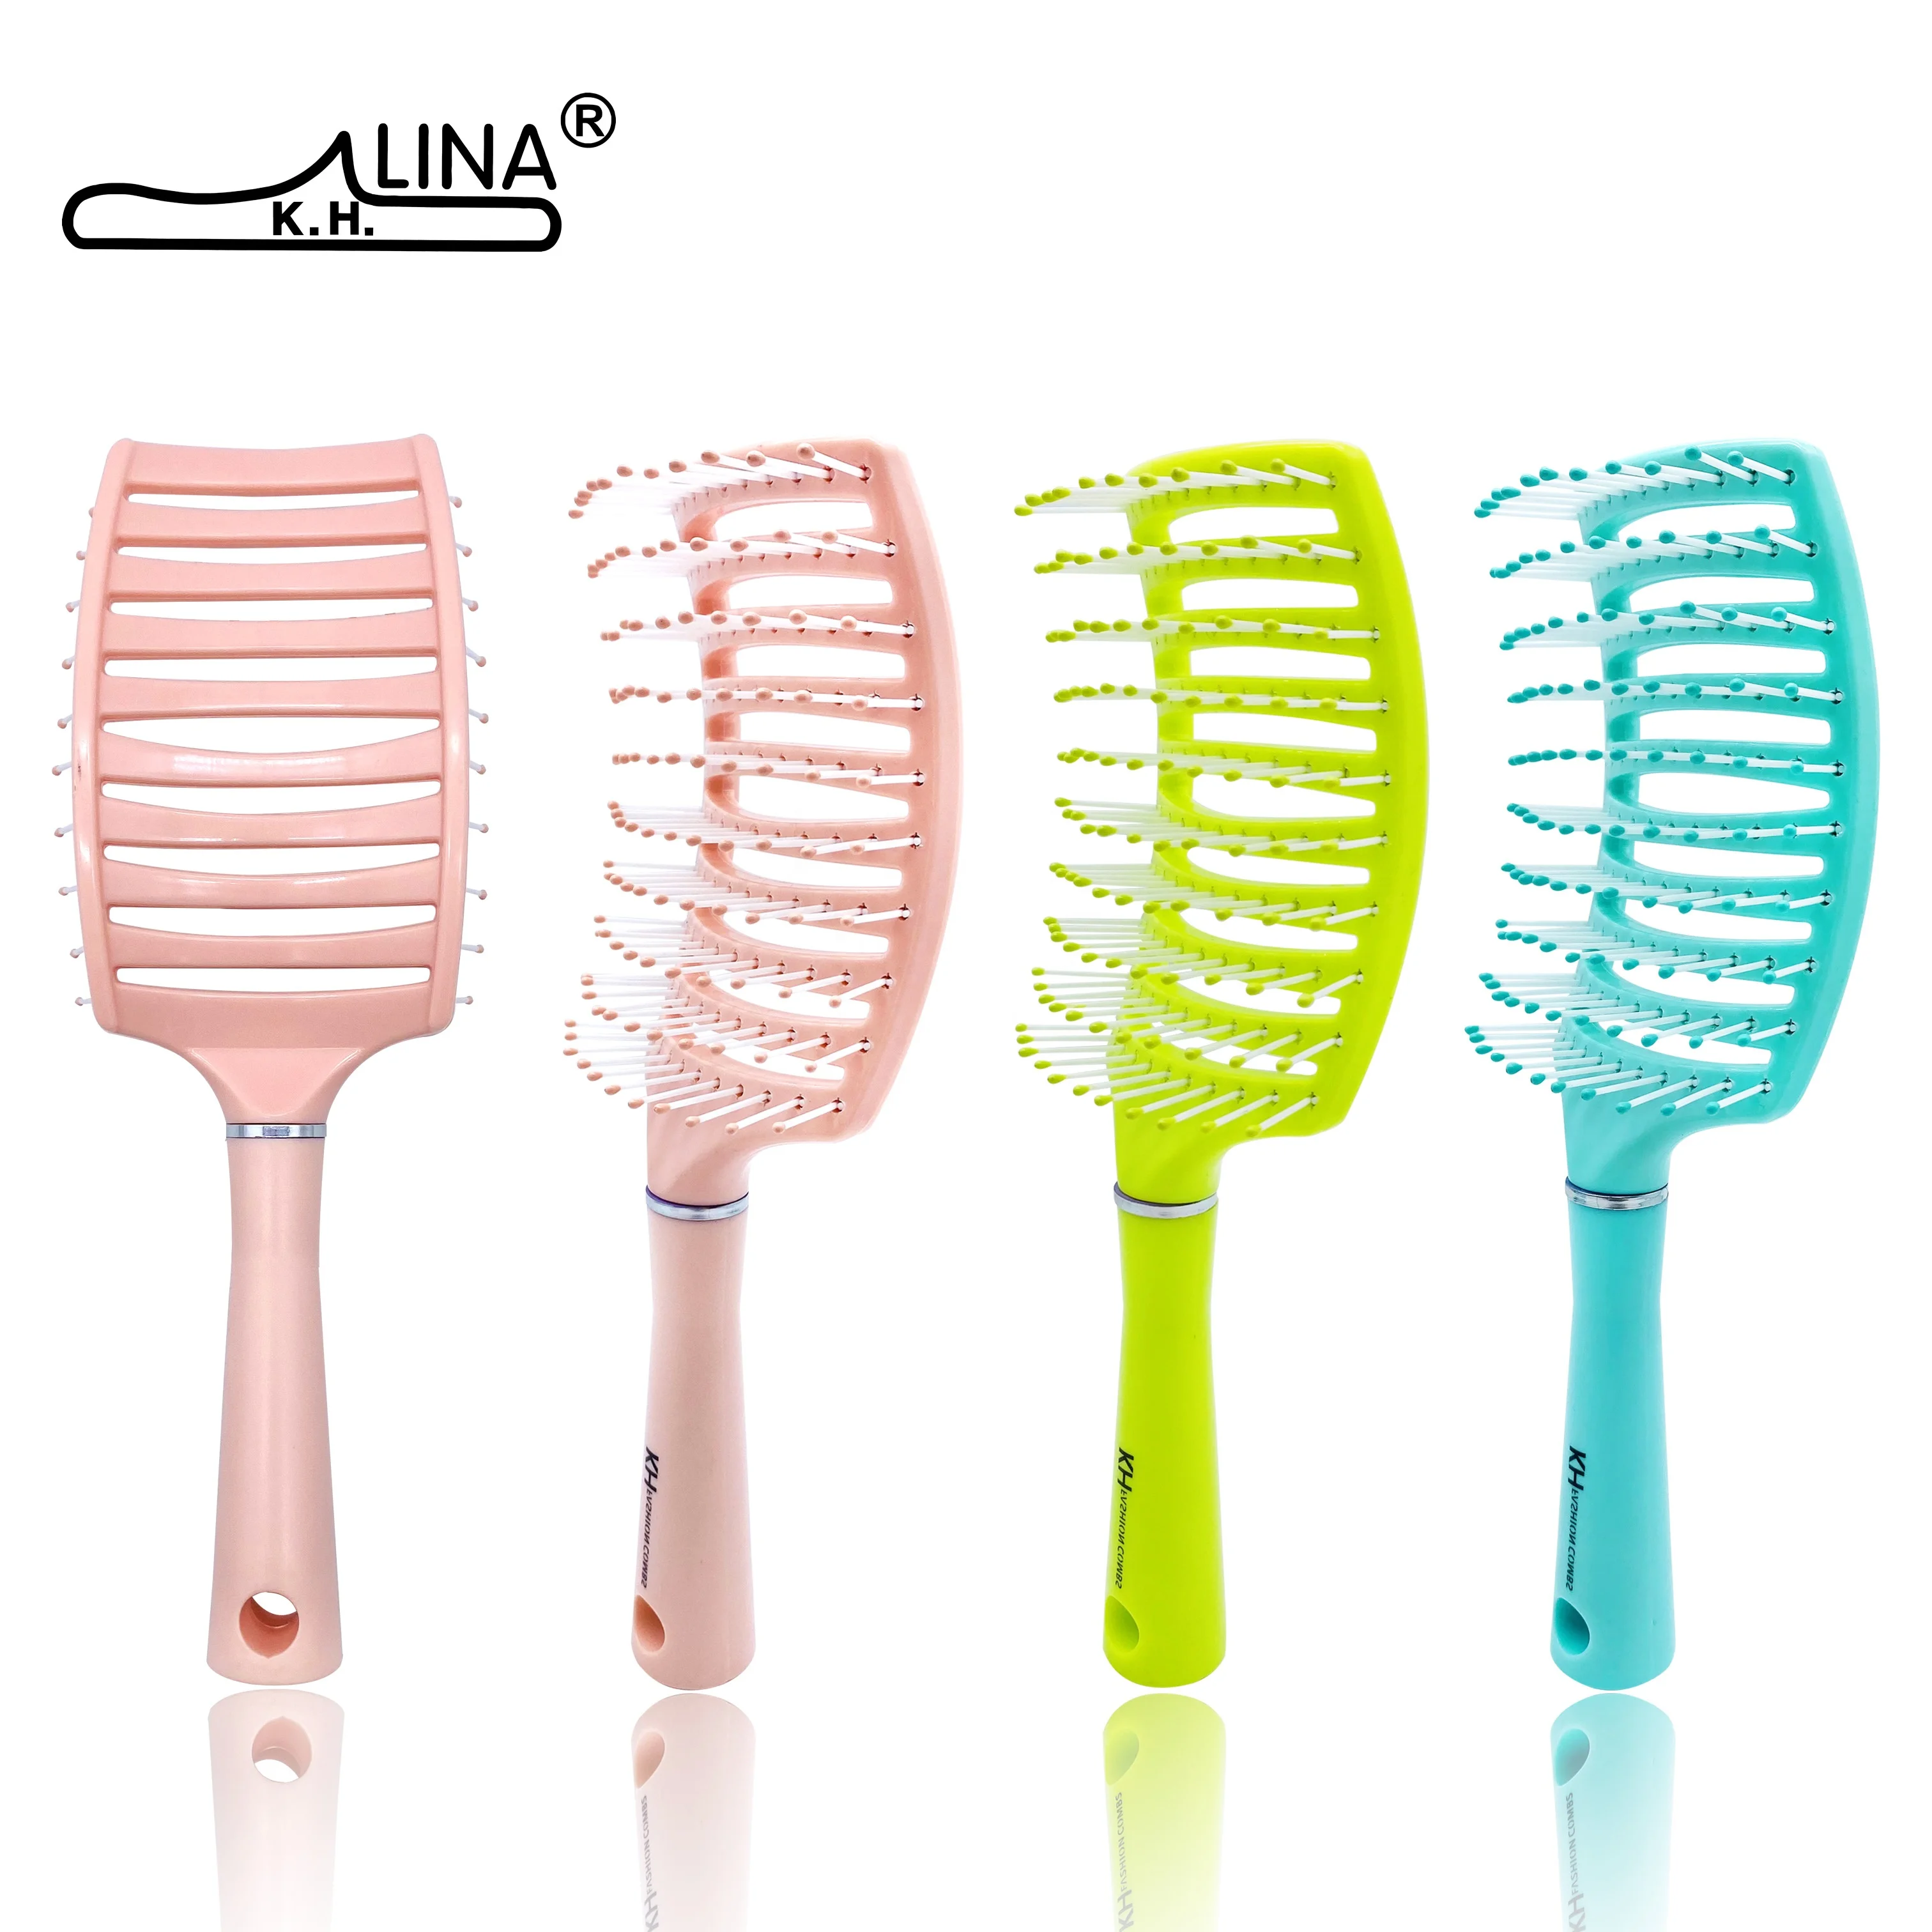 Hot Sale Curved Vented Styling Hair Brush blowing-drying Tool Fast Drying Hair Detangling hairbrush